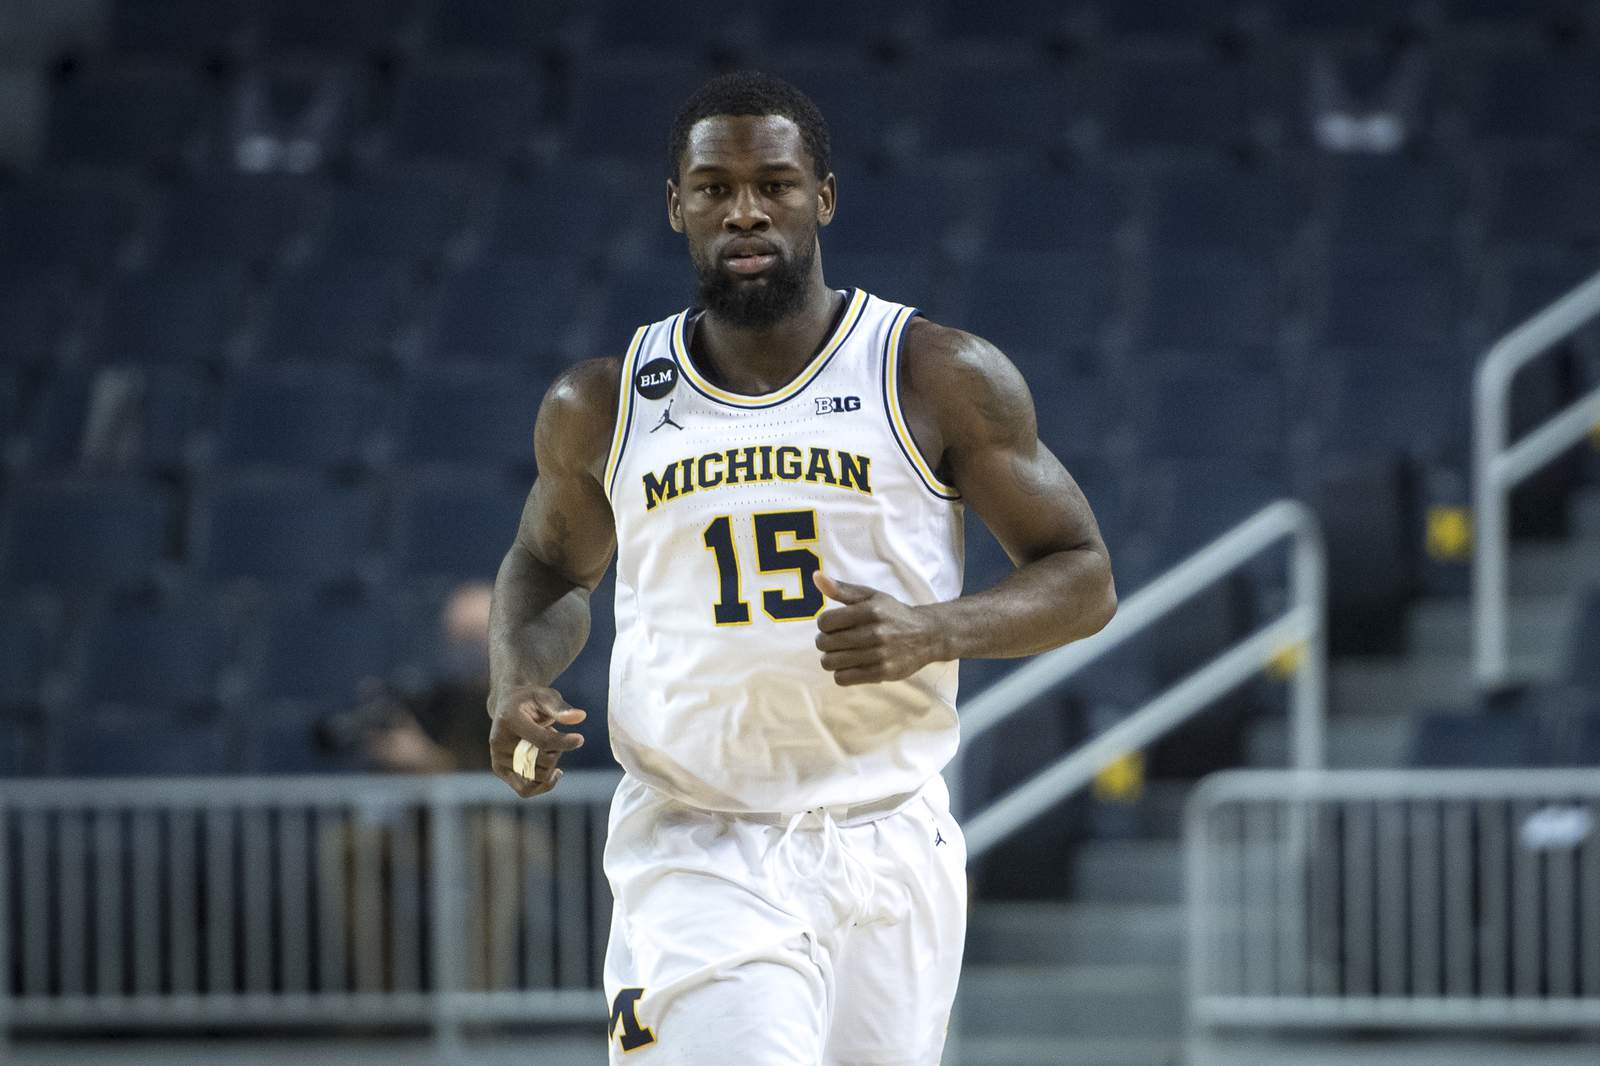 How Chaundee Brown’s numbers epitomize what makes this Michigan basketball team special